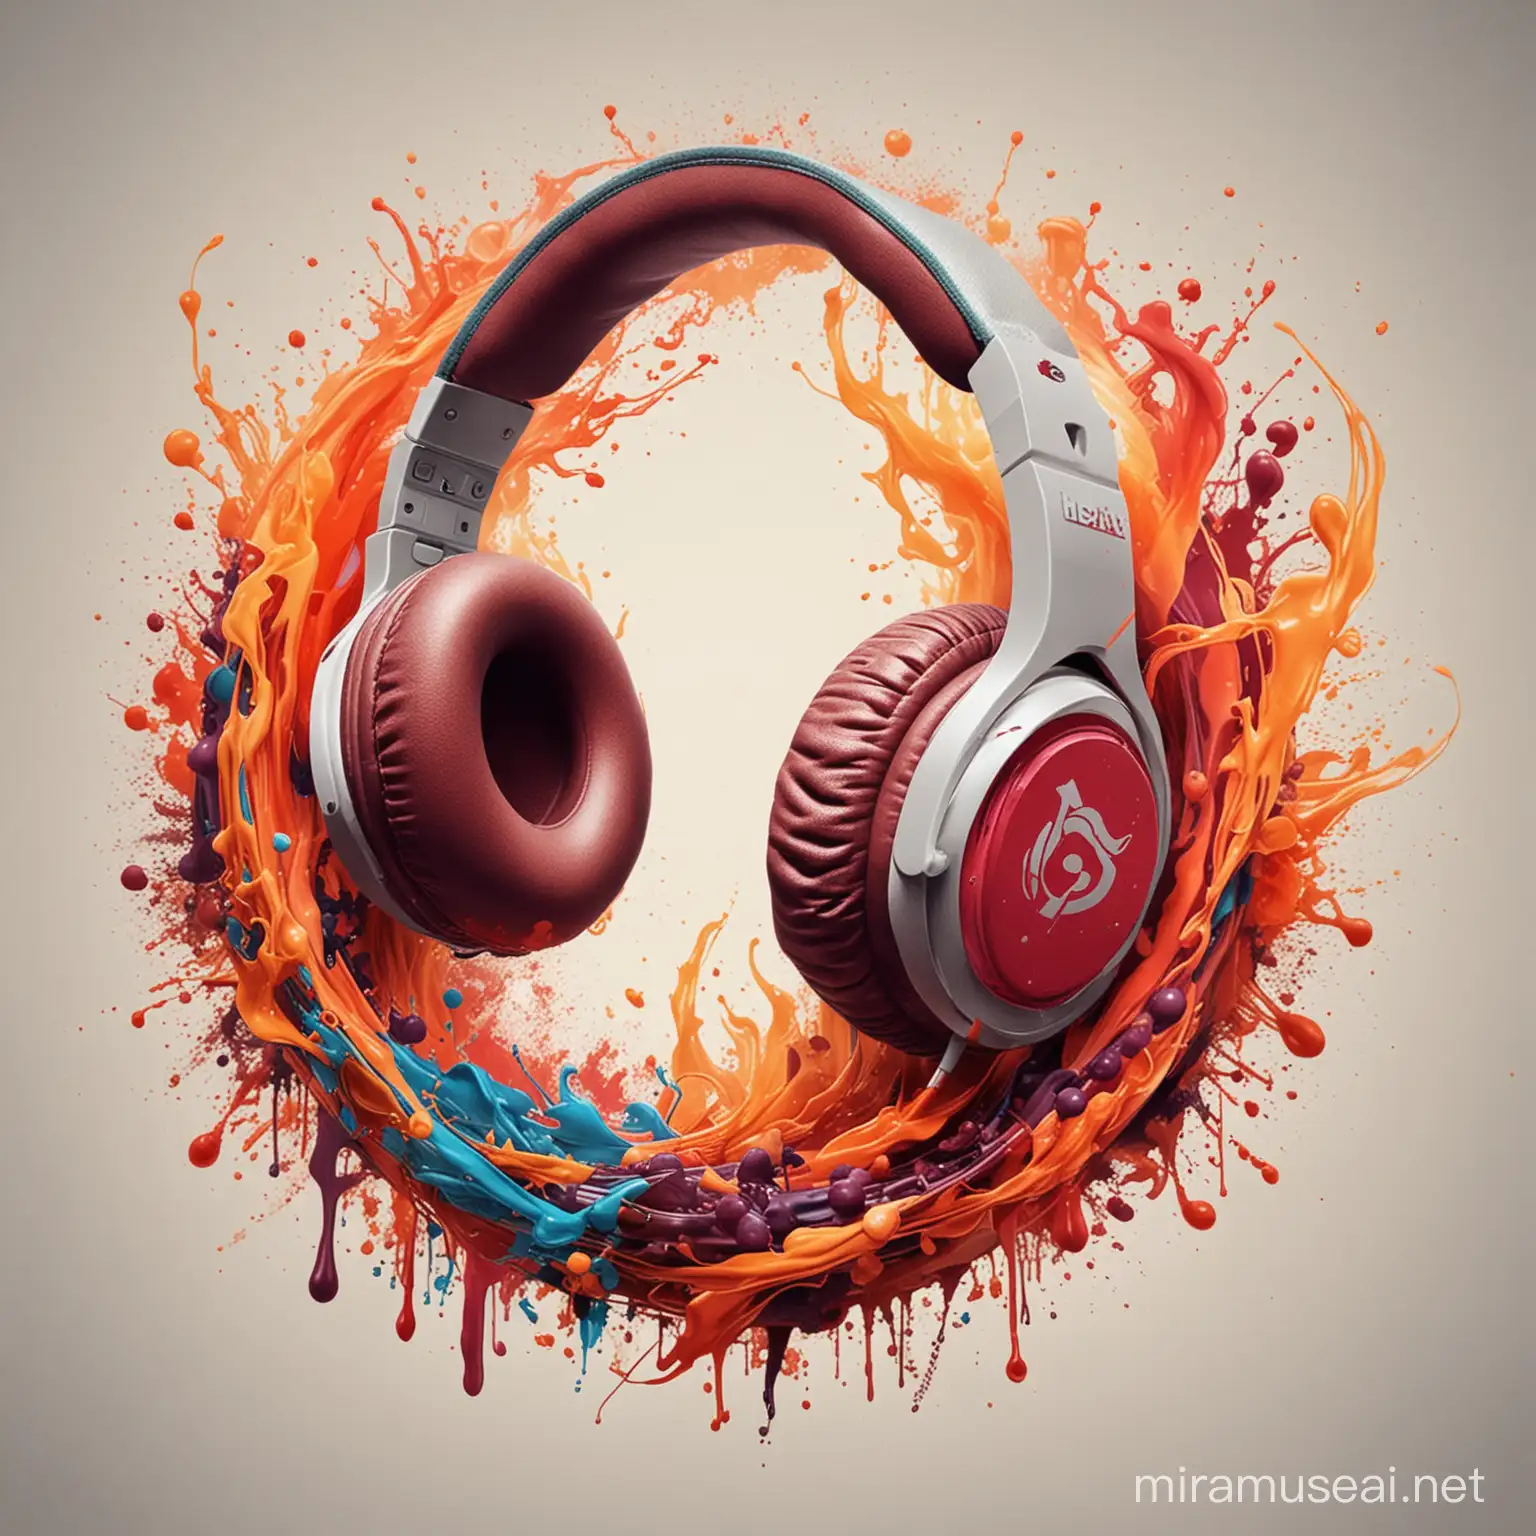 Vibrant Musical Notes on Fire Illustration of Hot Beats